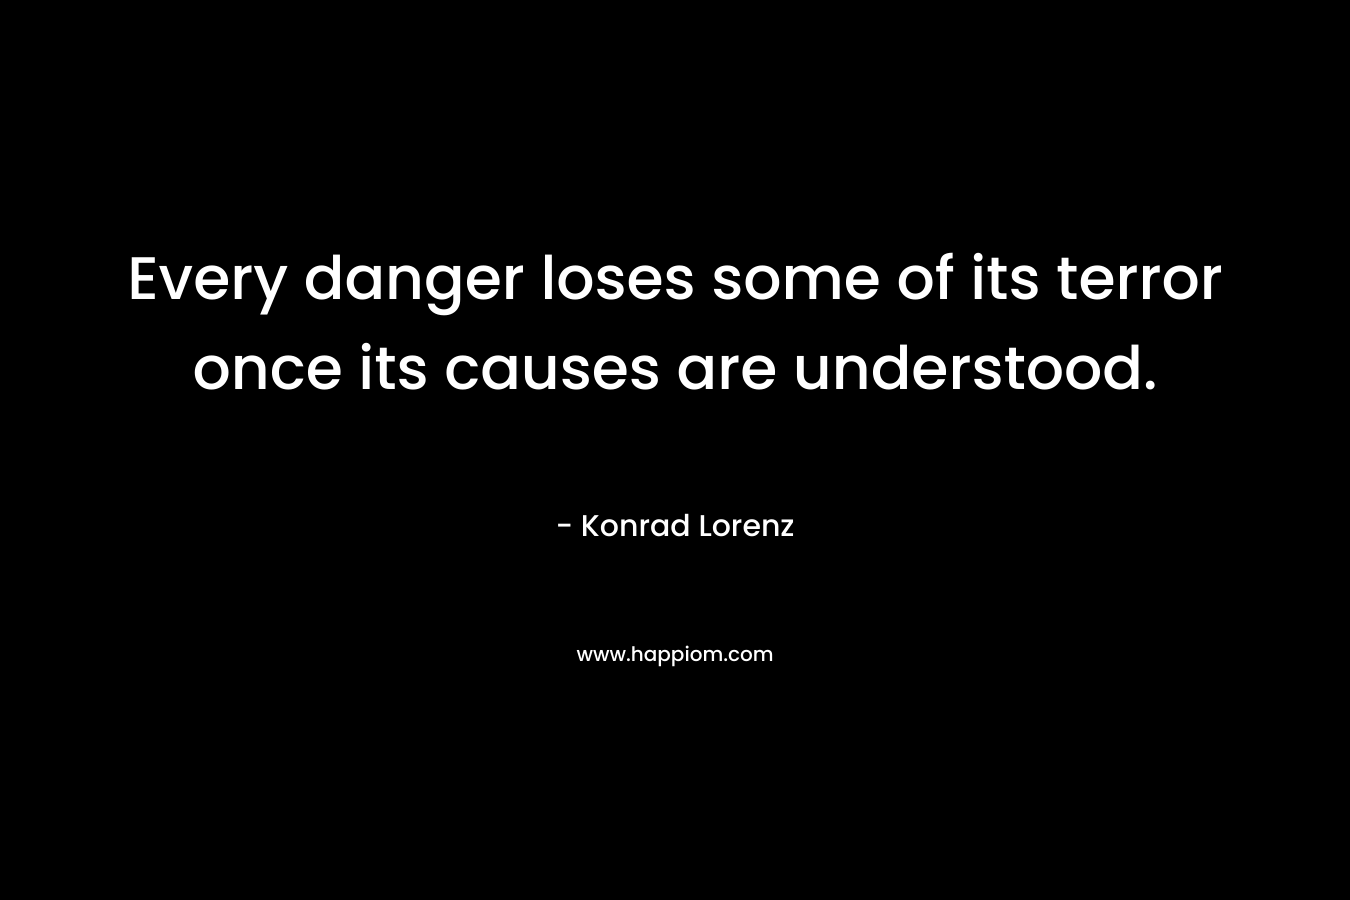 Every danger loses some of its terror once its causes are understood. – Konrad Lorenz